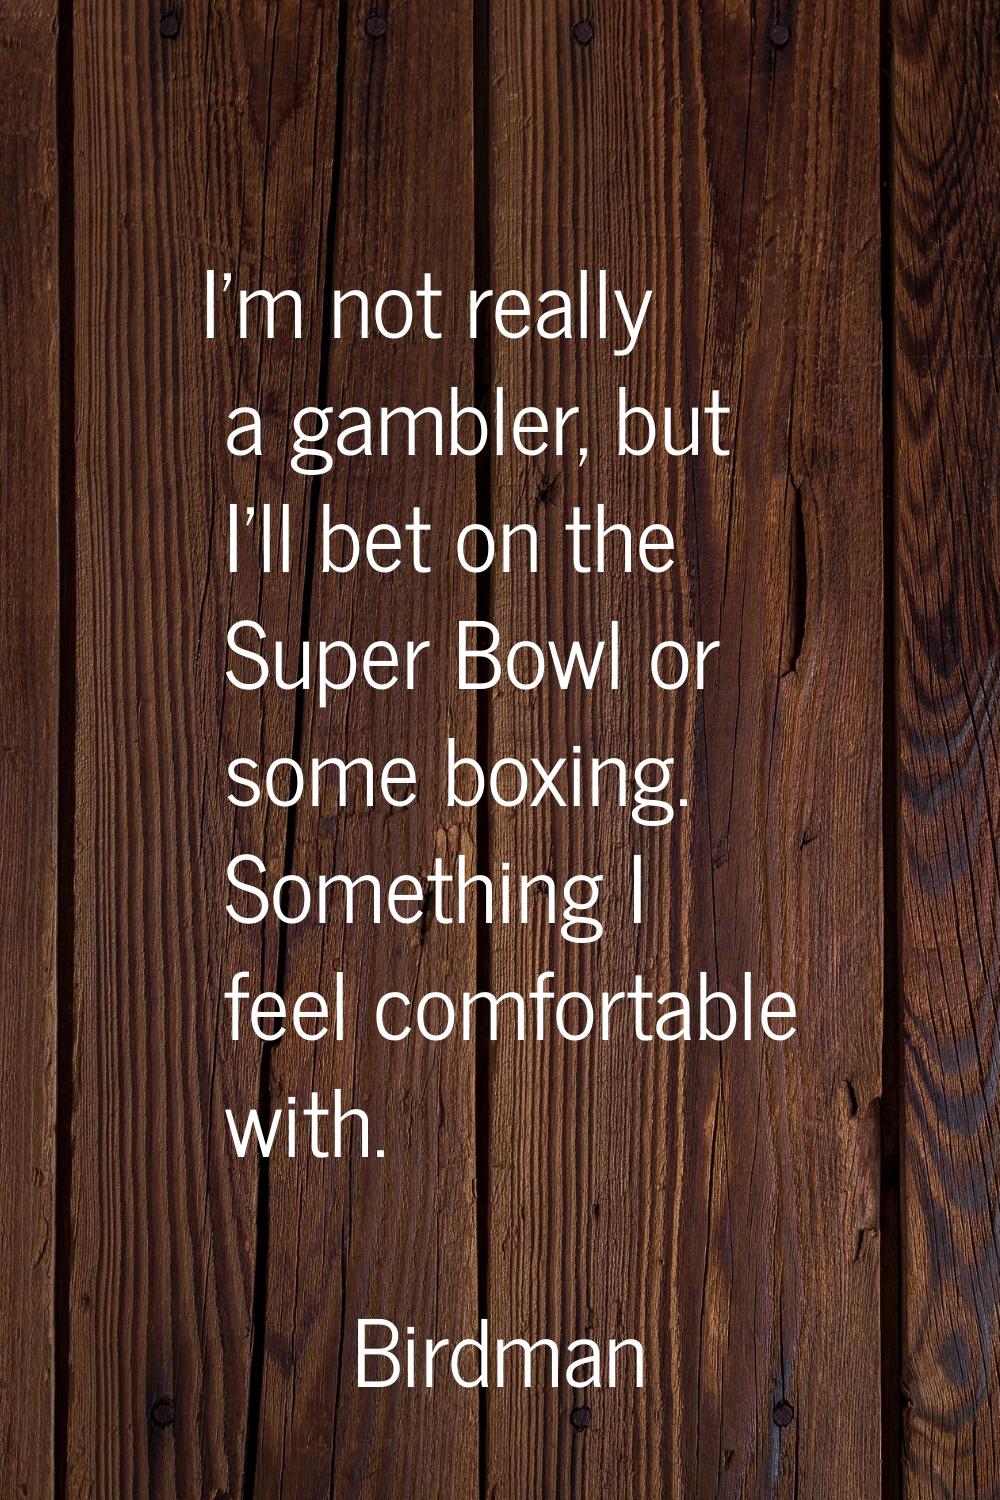 I'm not really a gambler, but I'll bet on the Super Bowl or some boxing. Something I feel comfortab